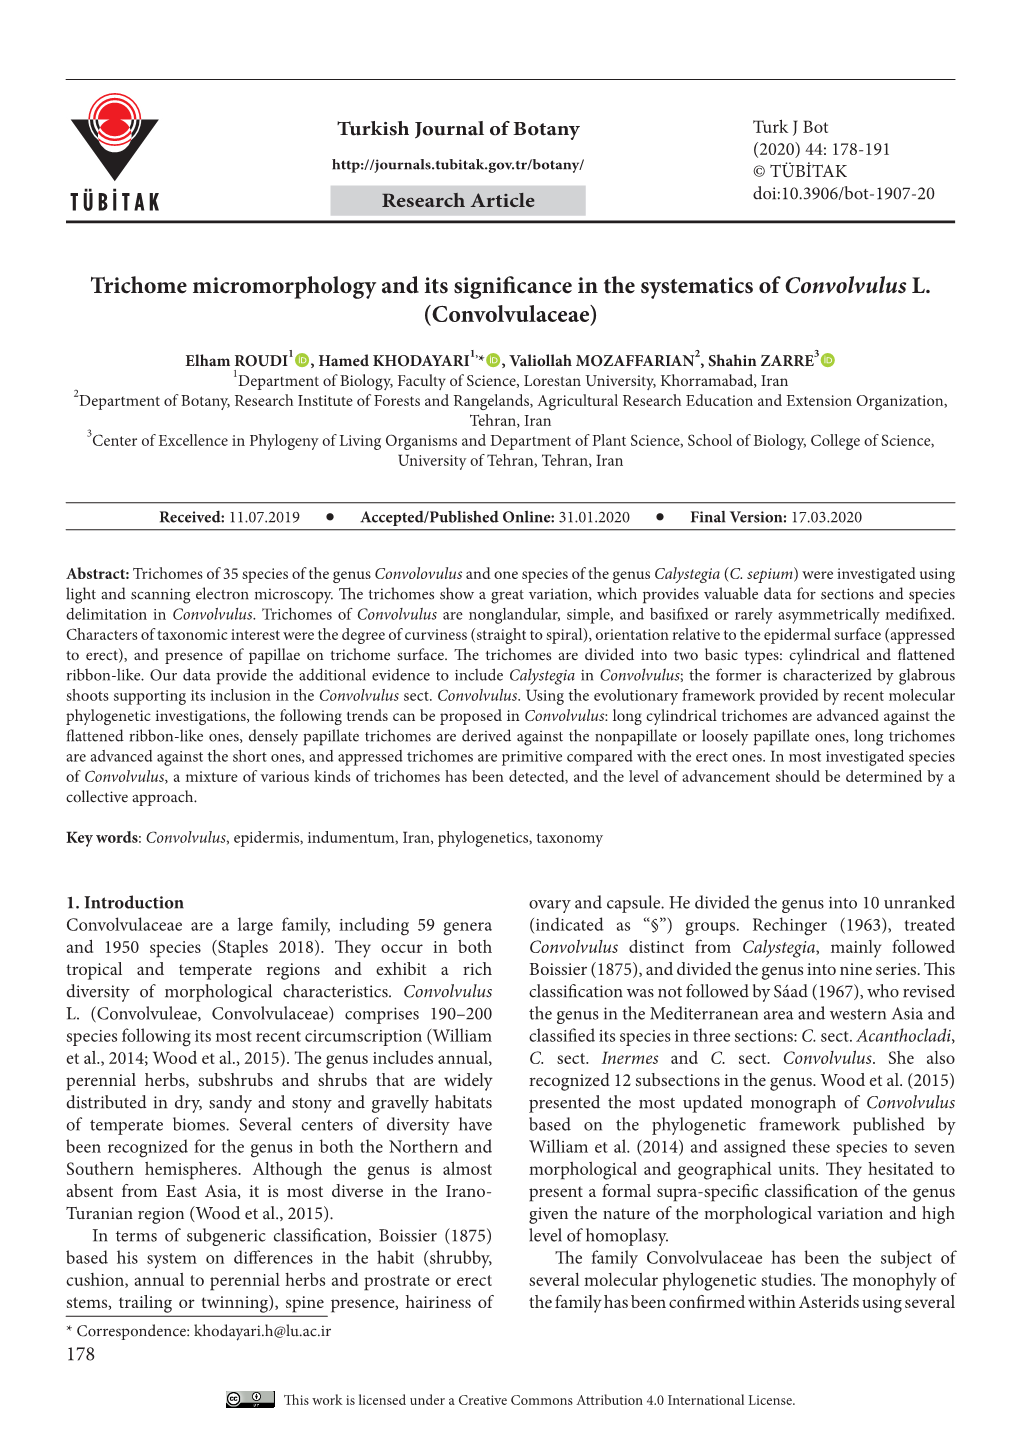 Trichome Micromorphology and Its Significance in the Systematics Ofconvolvulus L